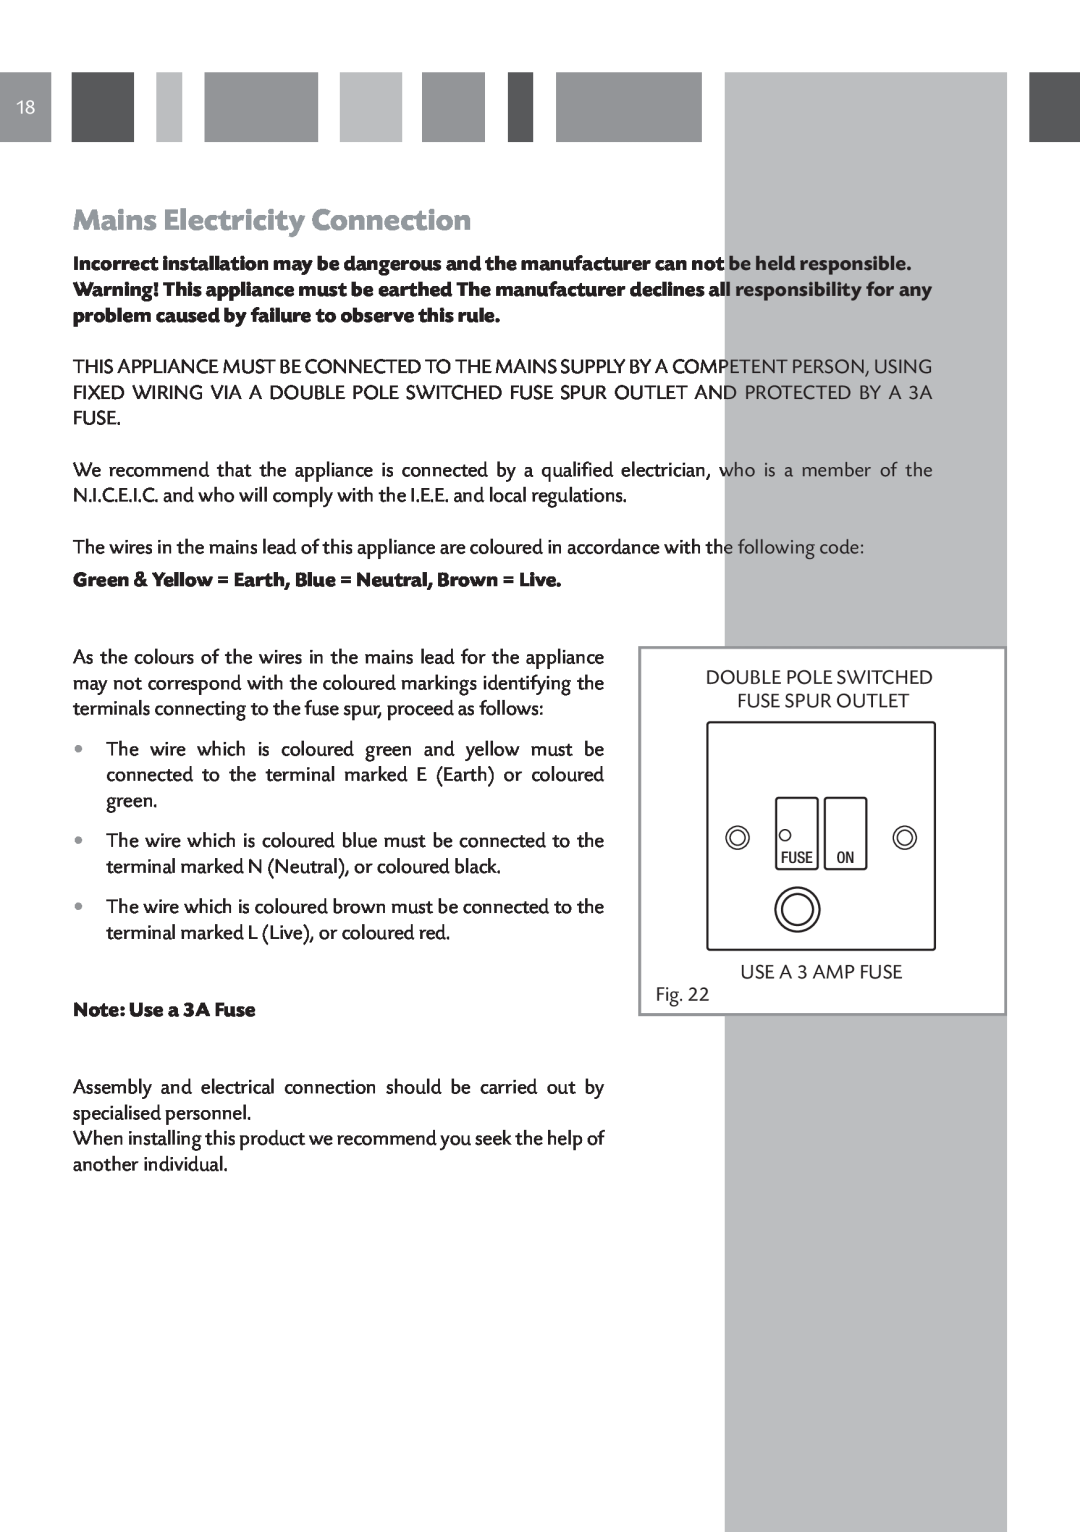 CDA HCG 931 manual Mains Electricity Connection, Note: Use a 3A Fuse 